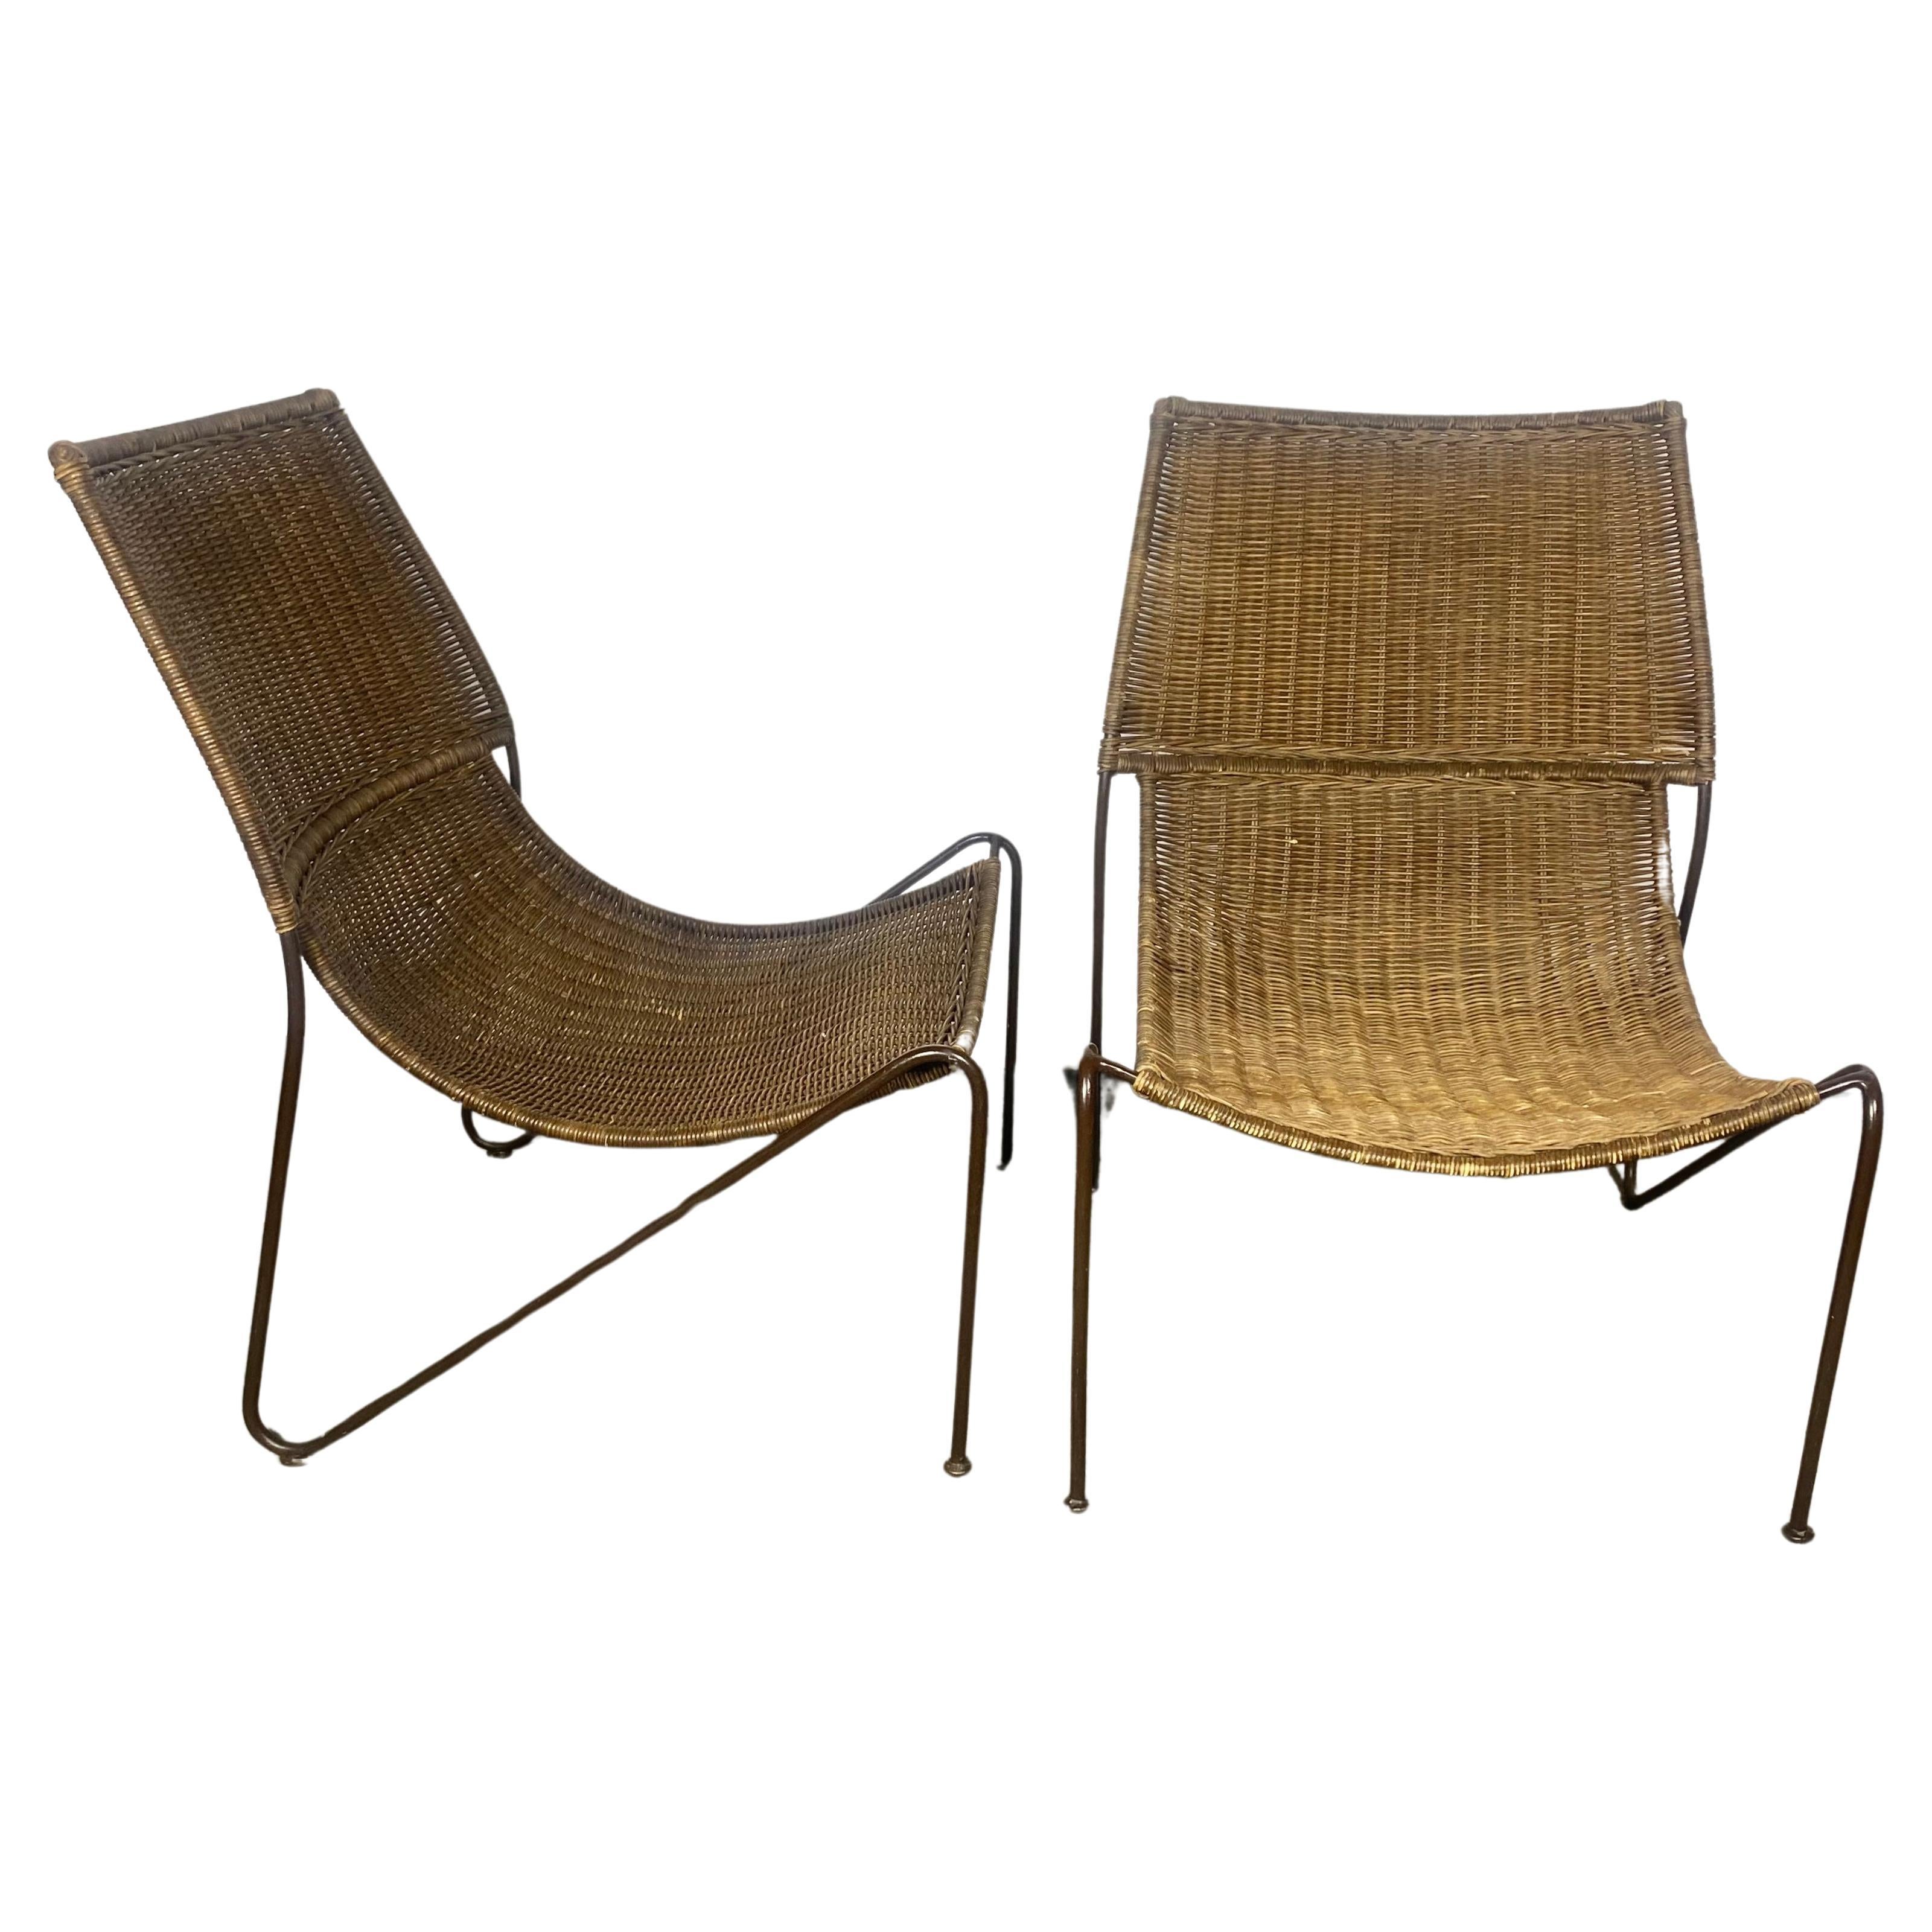 Classic Mid Century Modern Iron and Wicker Sling , lounge chairs .Weinberg Style